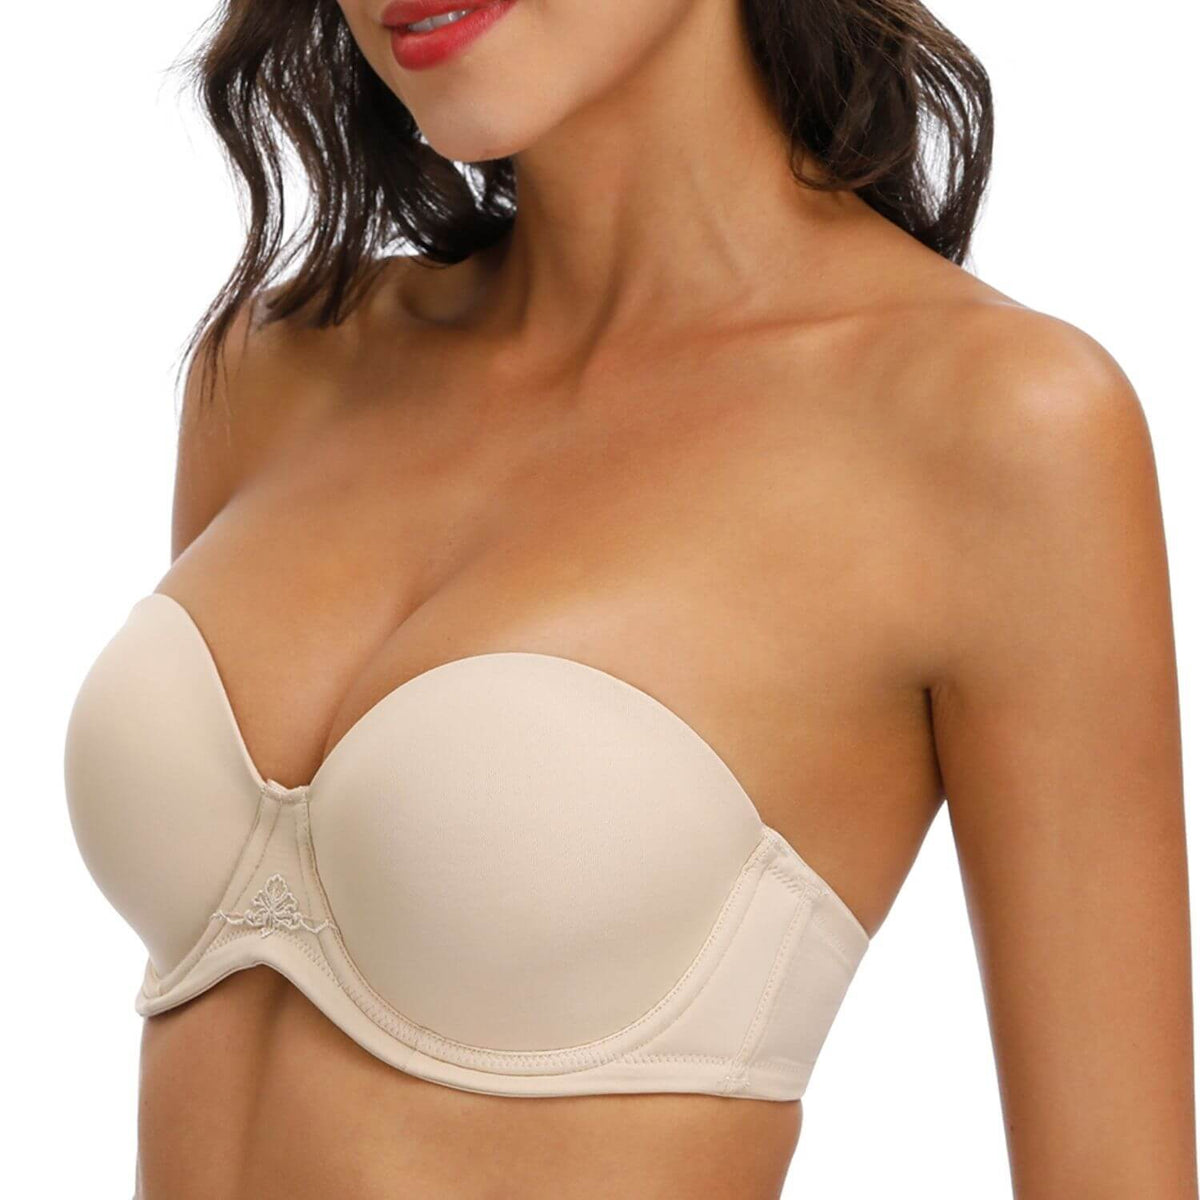 NWIB Voluptuous Backless Strapless Nude Bra size D